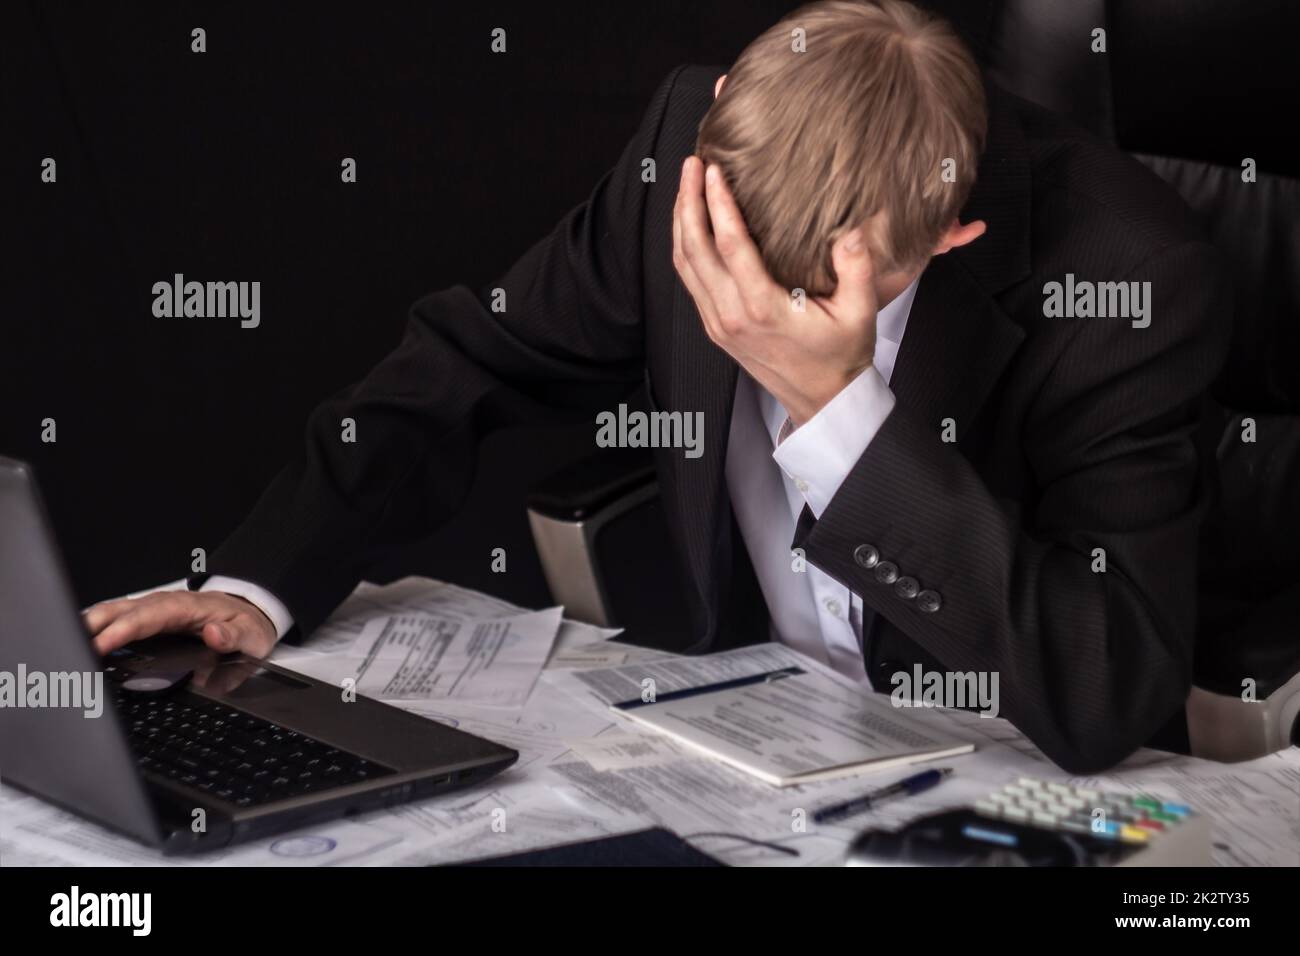 Businessman signing a contract. The Manager makes the report and fills in the Declaration. Businessman at work in his workplace. Young guy at the table with a laptop, cash register documents. Stock Photo